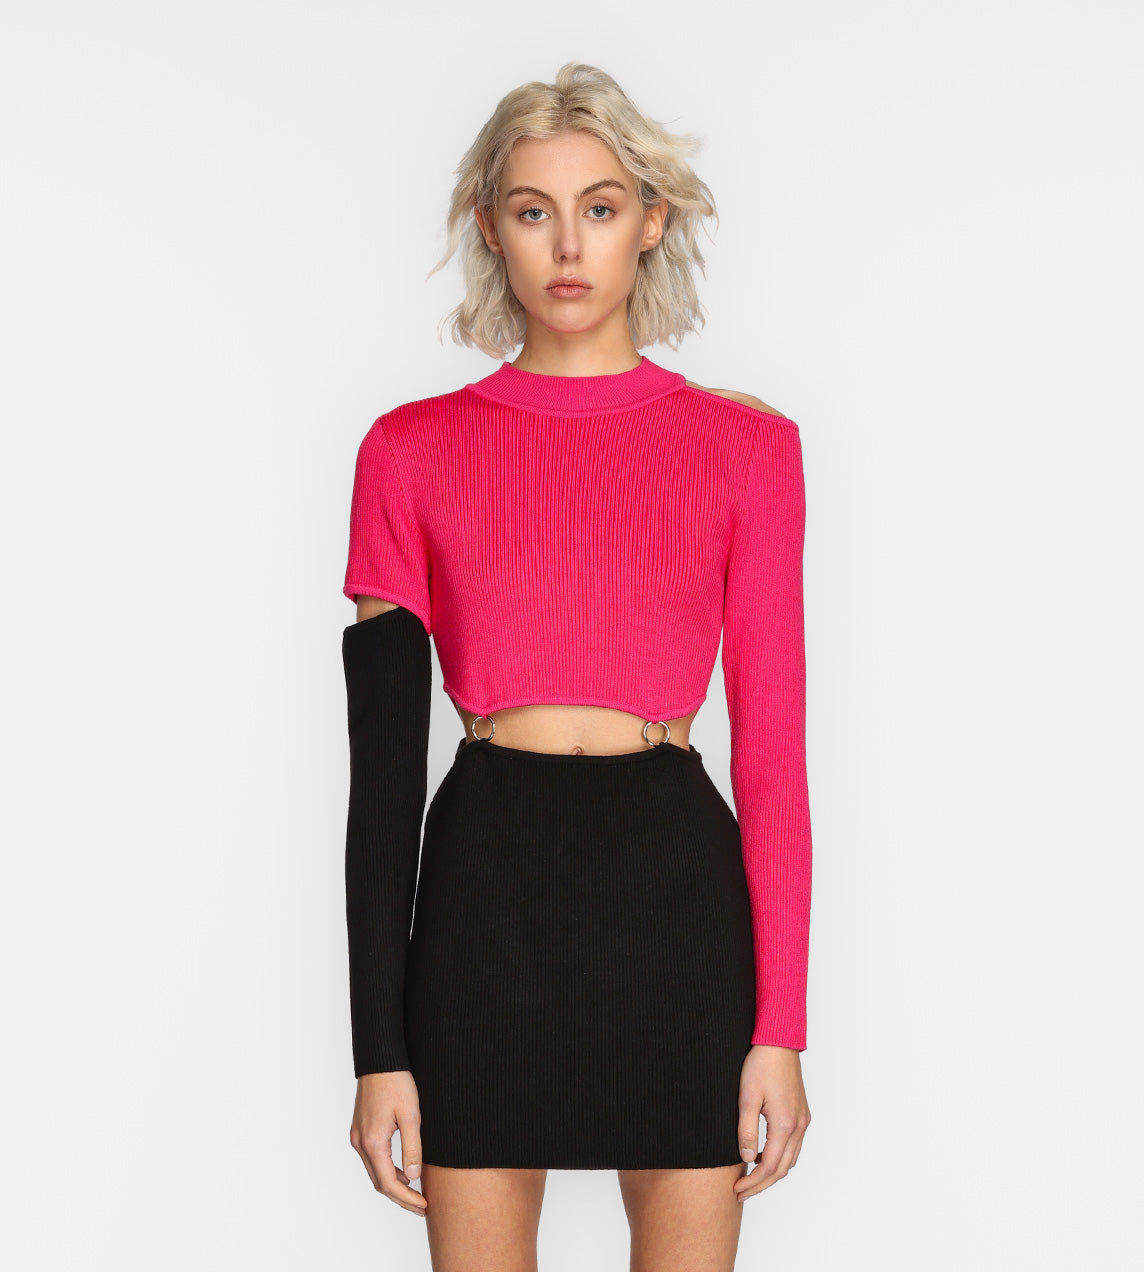 Andersson Bell - Buckle Back Knit Dress Pink/Black